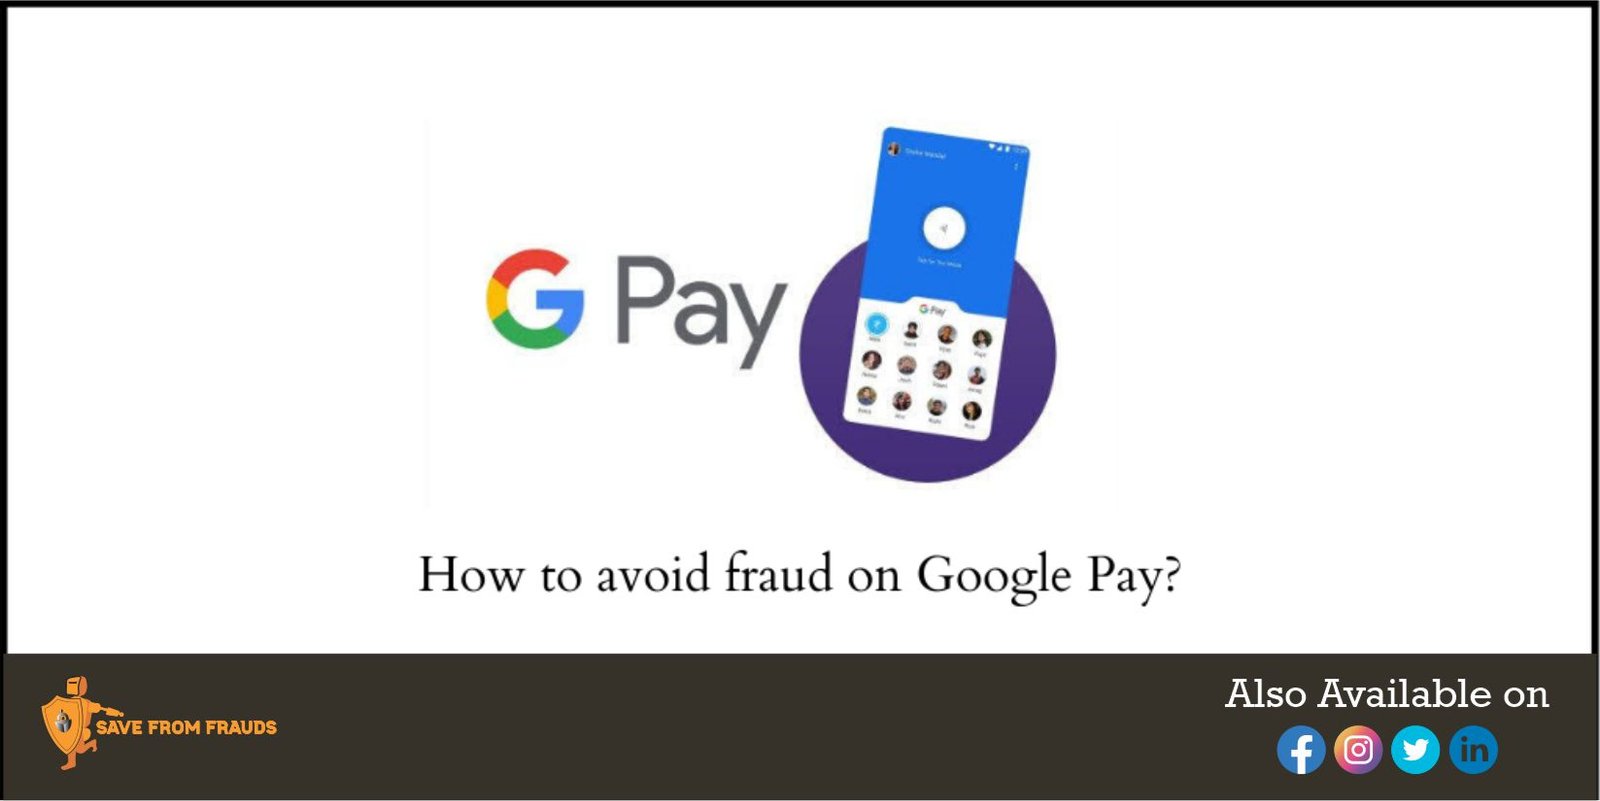 How can I protect myself against Google Pay fraud?